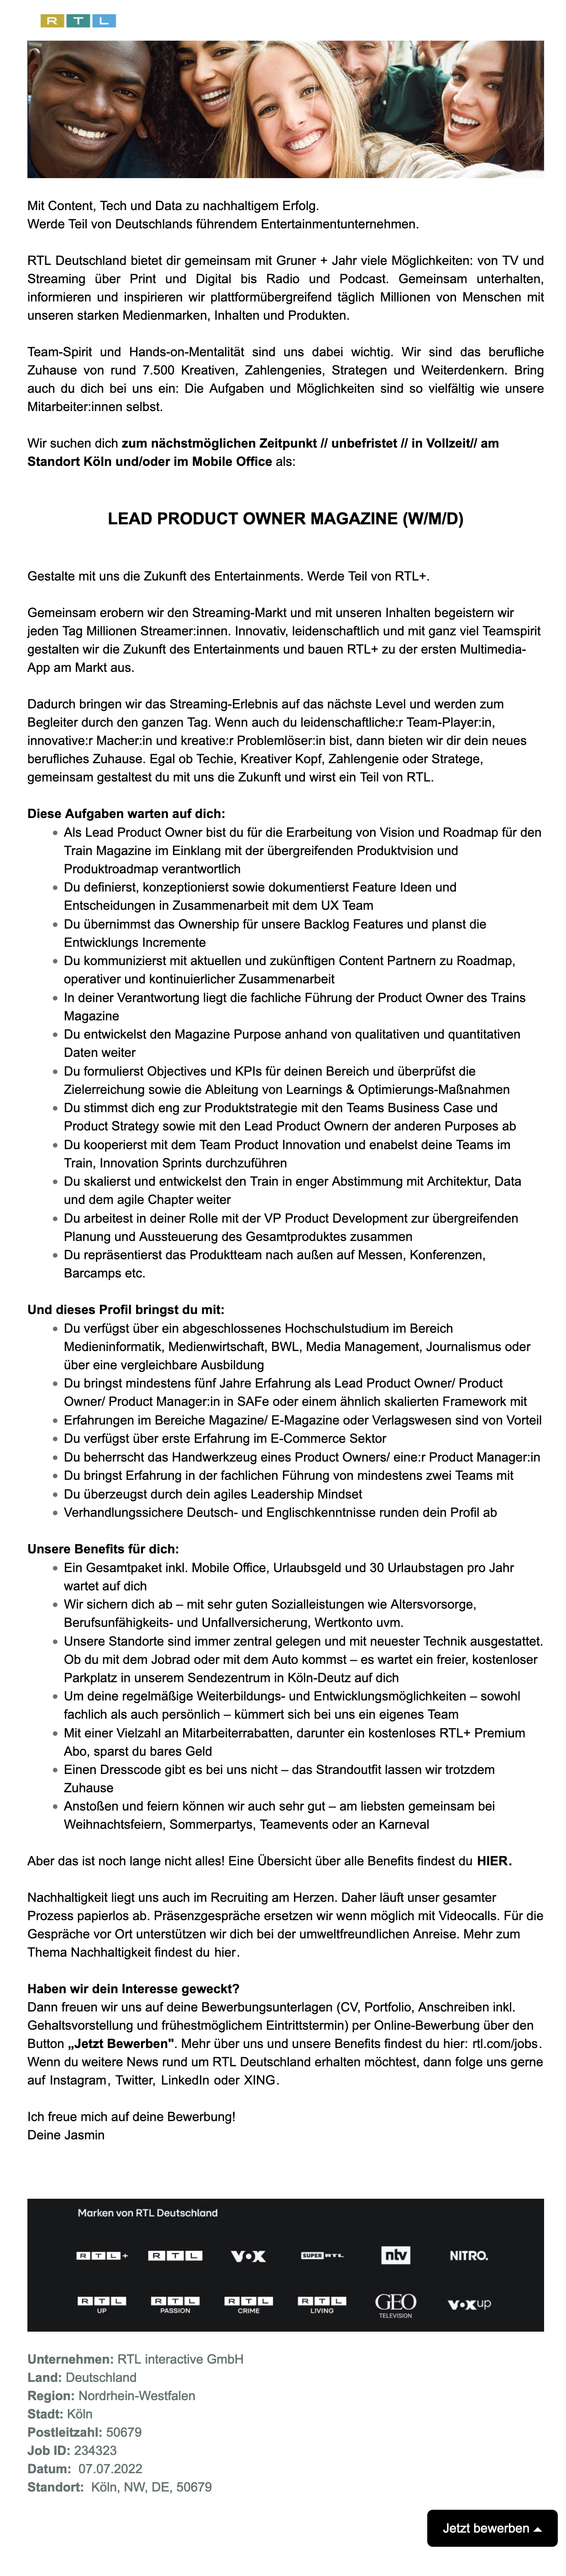 Lead Product Owner Magazine (w/m/d) (RTL interactive)